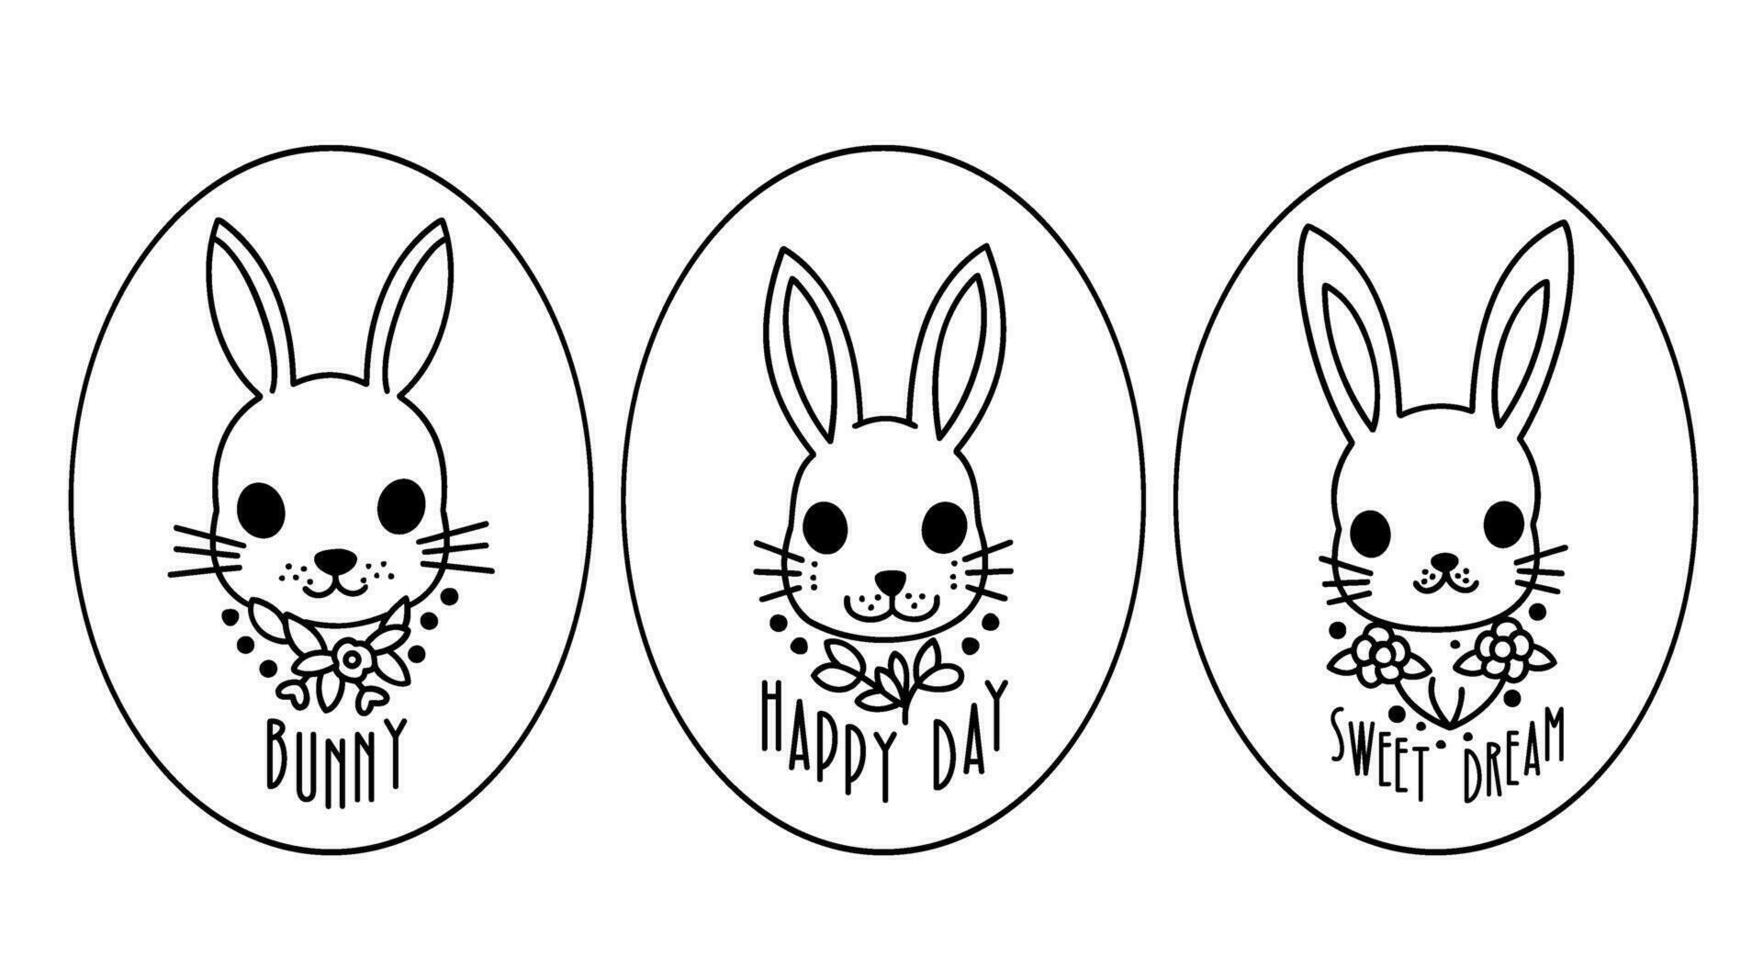 Rabbit tattoo design with round shapes, cute hand drawn bunny, black thin line art, vector illustration.